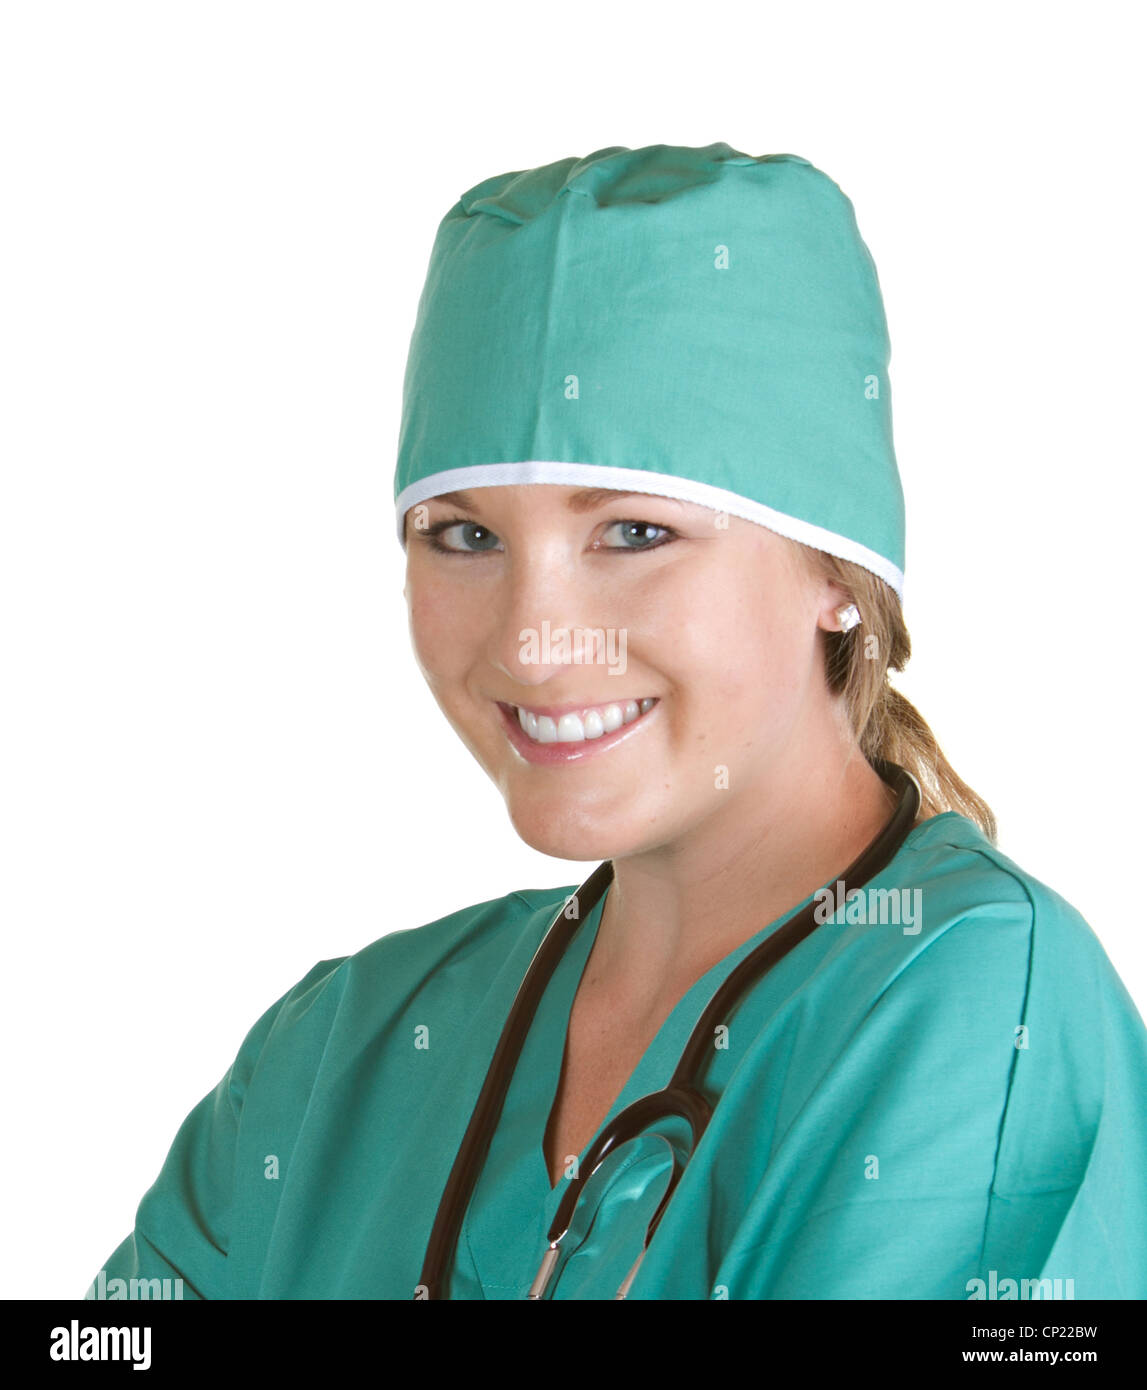 Smiling female nurse wearing green scrubs with surgical hat Stock Photo